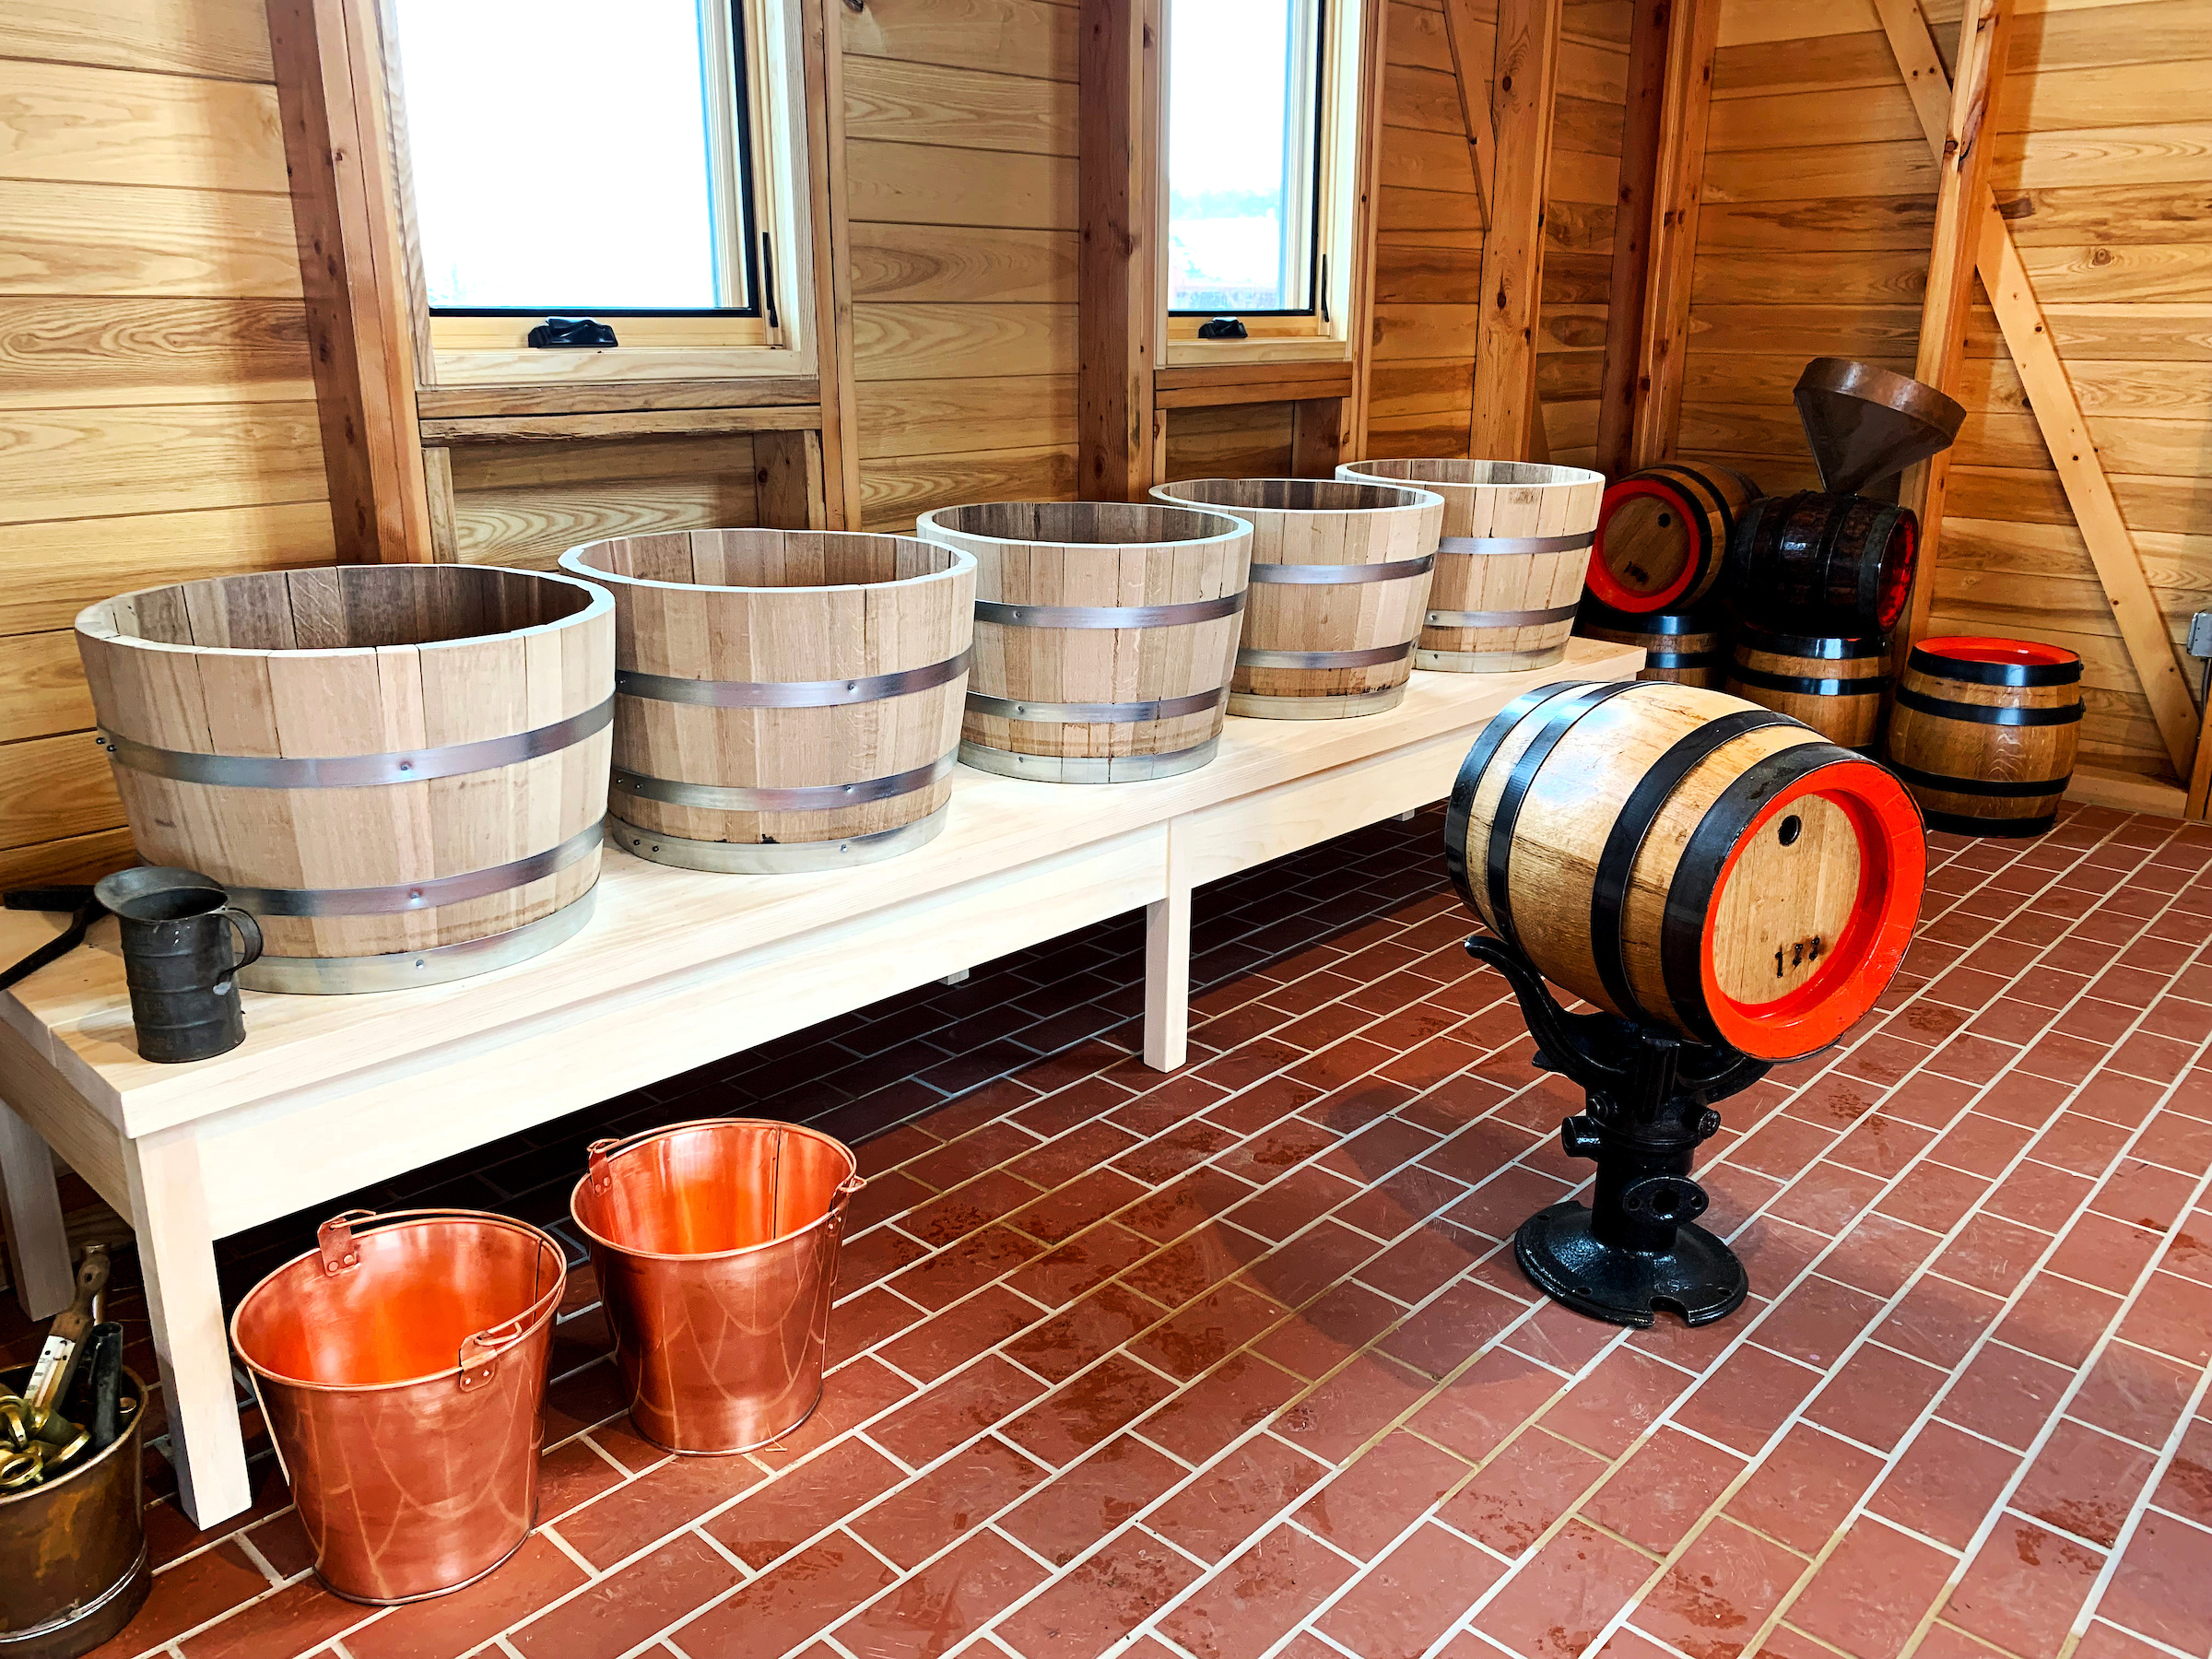 The five fermentation vats (one for each day of brewing during the summer season) and kegs shown as equipment is moved into the new Brewhouse at Old World Wisconsin in preparation for the June 2022 grand opening events. Taken 2.24.22 by Dan Freas